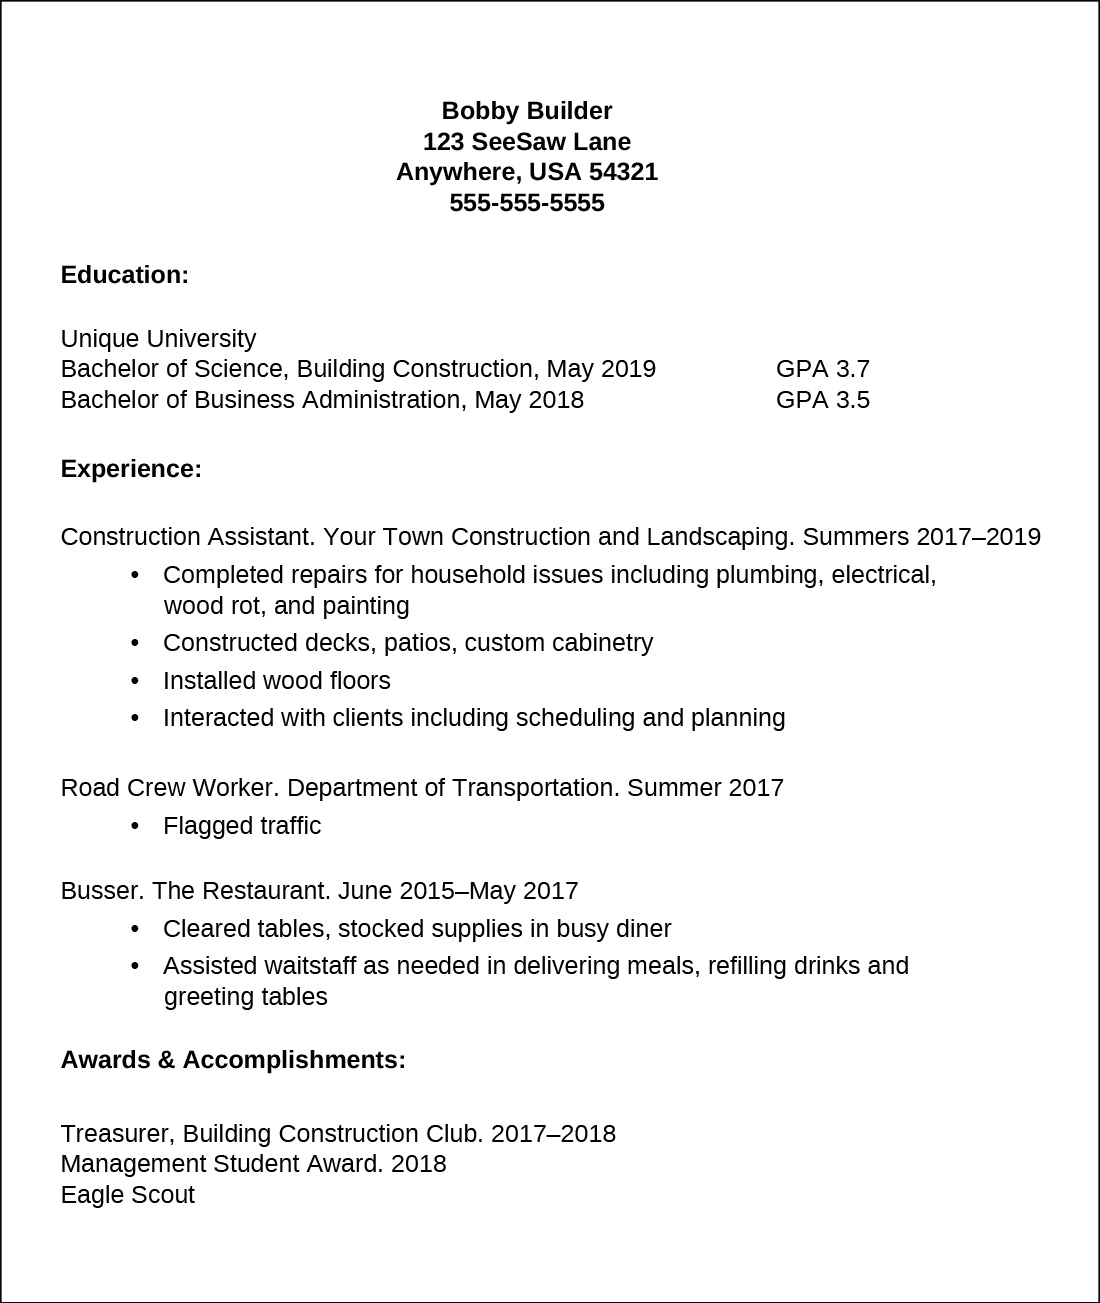 A sample résumé starts with the following information at the top, centered: Bobby Builder; 123 SeeSaw Lane; Anywhere, USA 54321; 555-555-5555. The first section is labeled Education. It lists Unique University; Bachelor of Science, Building Construction, May 2019, GPA 3.7; Bachelor of Business Administration, May 2018, GPA 3.5. The next section is labeled Experience. It lists Construction Assistant. Your Town Construction and Landscaping. Summers 2017 to 2019. Below this line are bullet points: Completed repairs for household issues including plumbing, electrical, wood rot, and painting; Constructed decks, patios, custom cabinetry; Installed wood floors; Interacted with clients including scheduling and planning. Next is Road Crew Worker. Department of Transportation. Summer 2017. Below this line is the bullet Flagged traffic. Next is Busser. The Restaurant. June 2015 to May 2017. Below this line are the bullets Cleared tables, stocked supplies in busy diner; Assisted wait staff as needed in delivering meals, refilling drinks, and greeting tables. The next section is Awards and Accomplishments. It lists Treasurer, Building Construction Club. 2017 to 2018; Management Student Award. 2018; Eagle Scout.